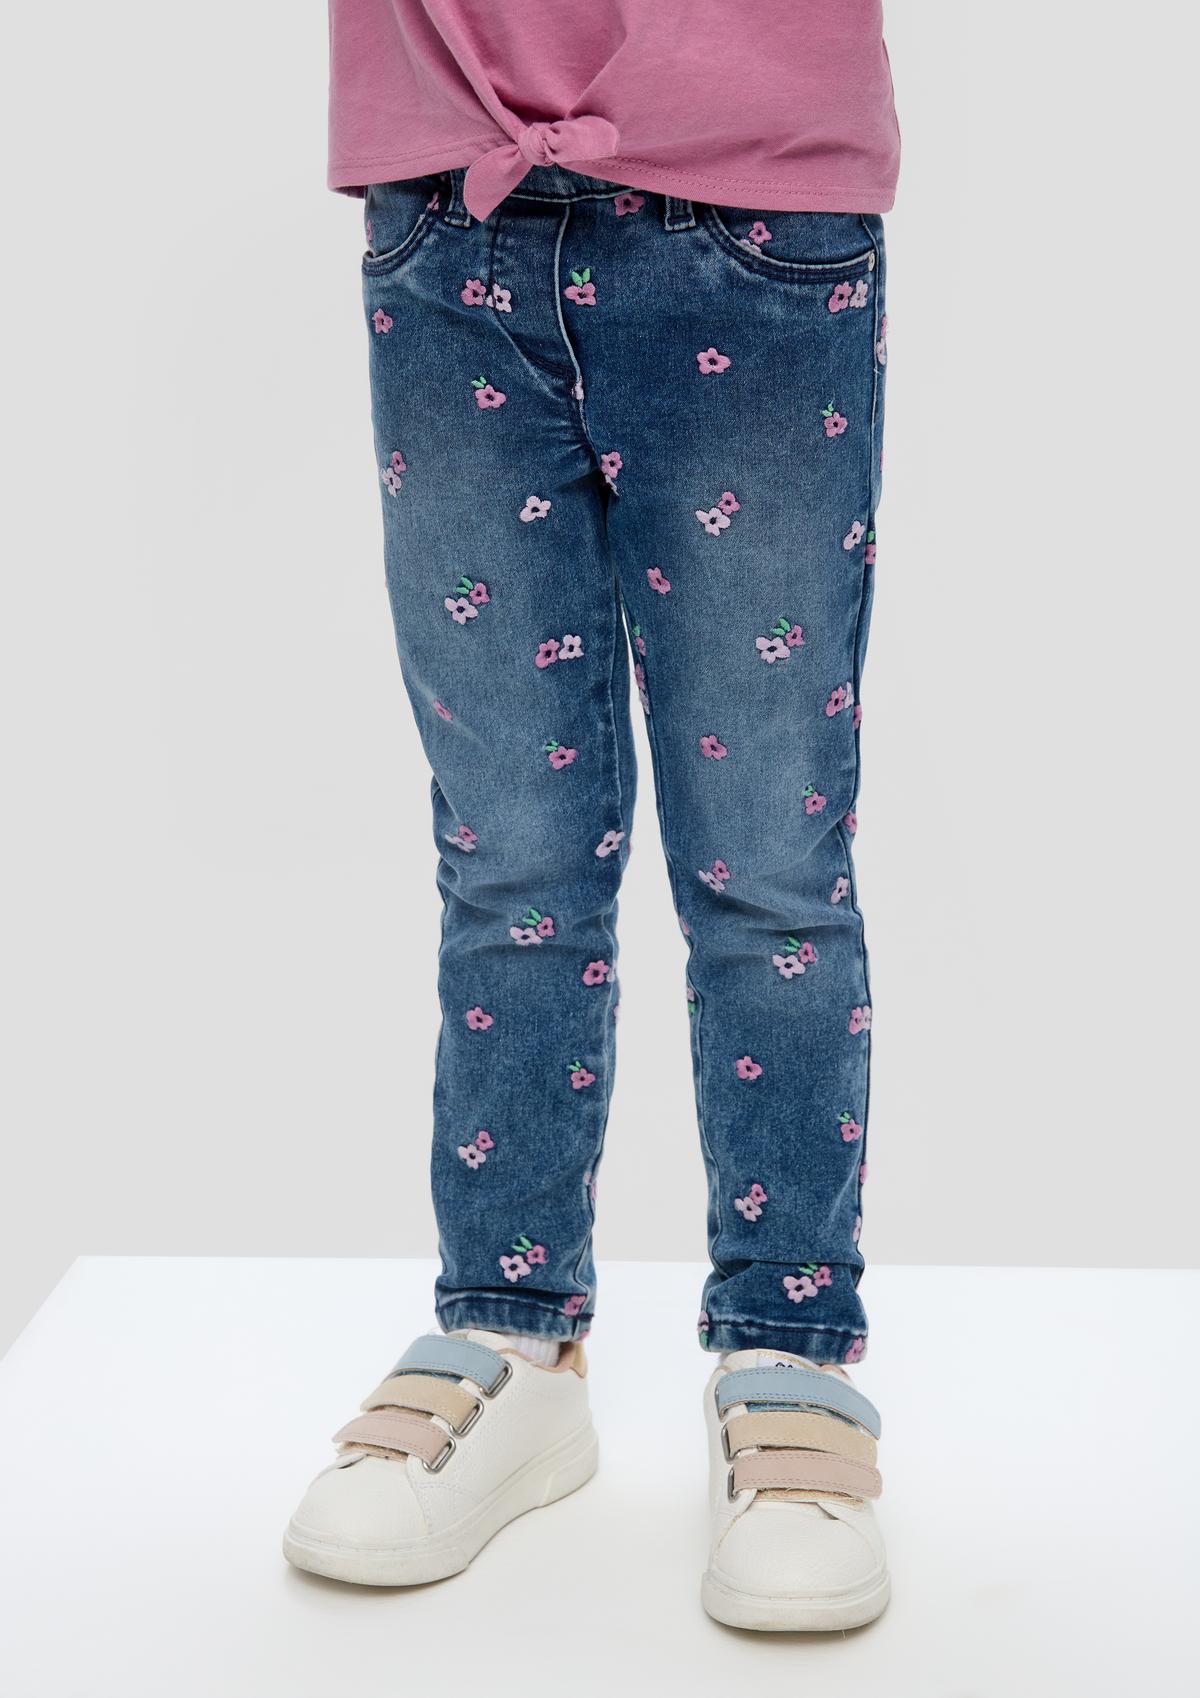 Jeans / slim fit / high rise / slim leg / floral embroidery